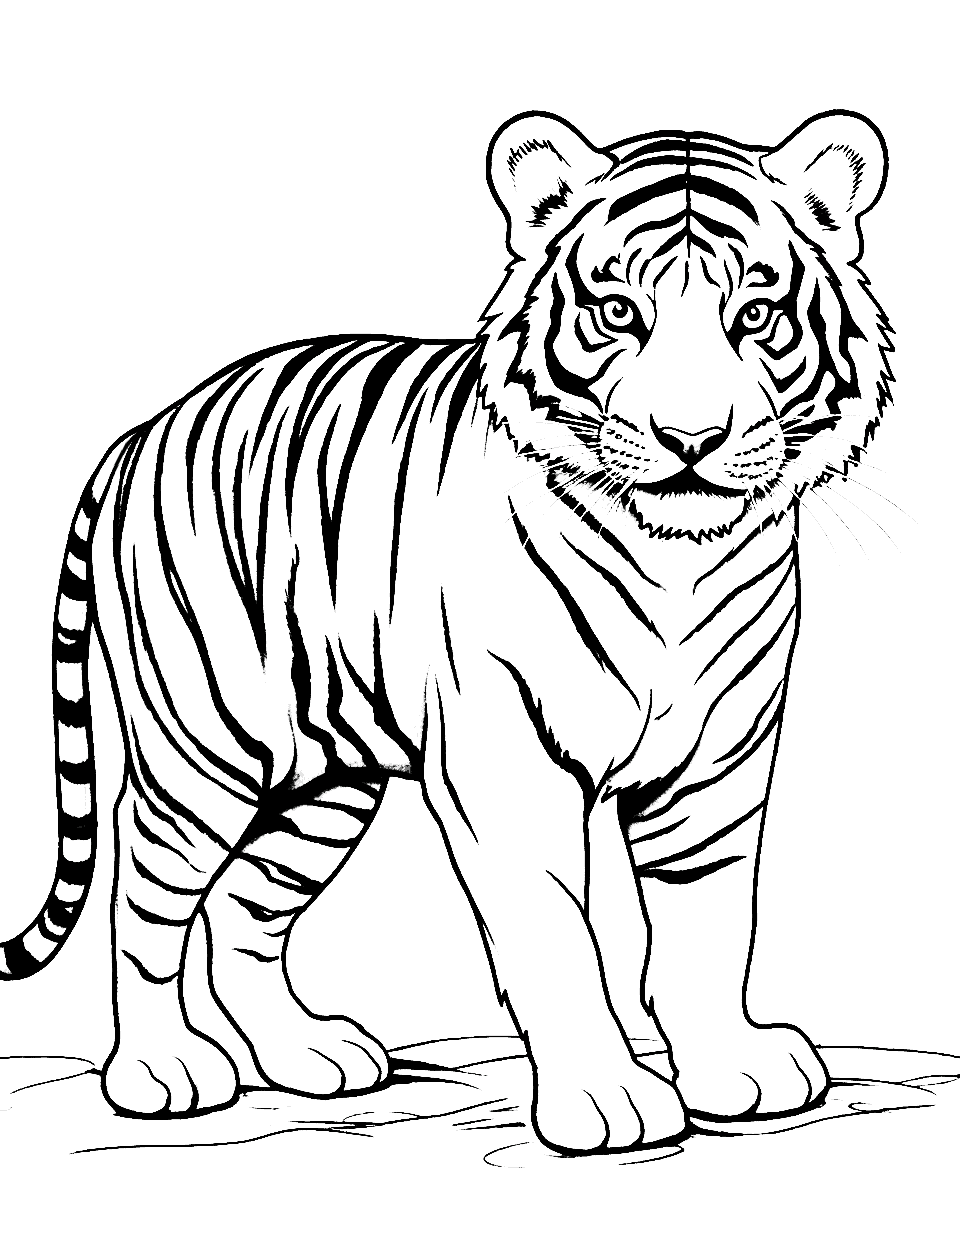 Eager Eyes Tiger Coloring Page - A tiger cub with wide eyes spotting something interesting.